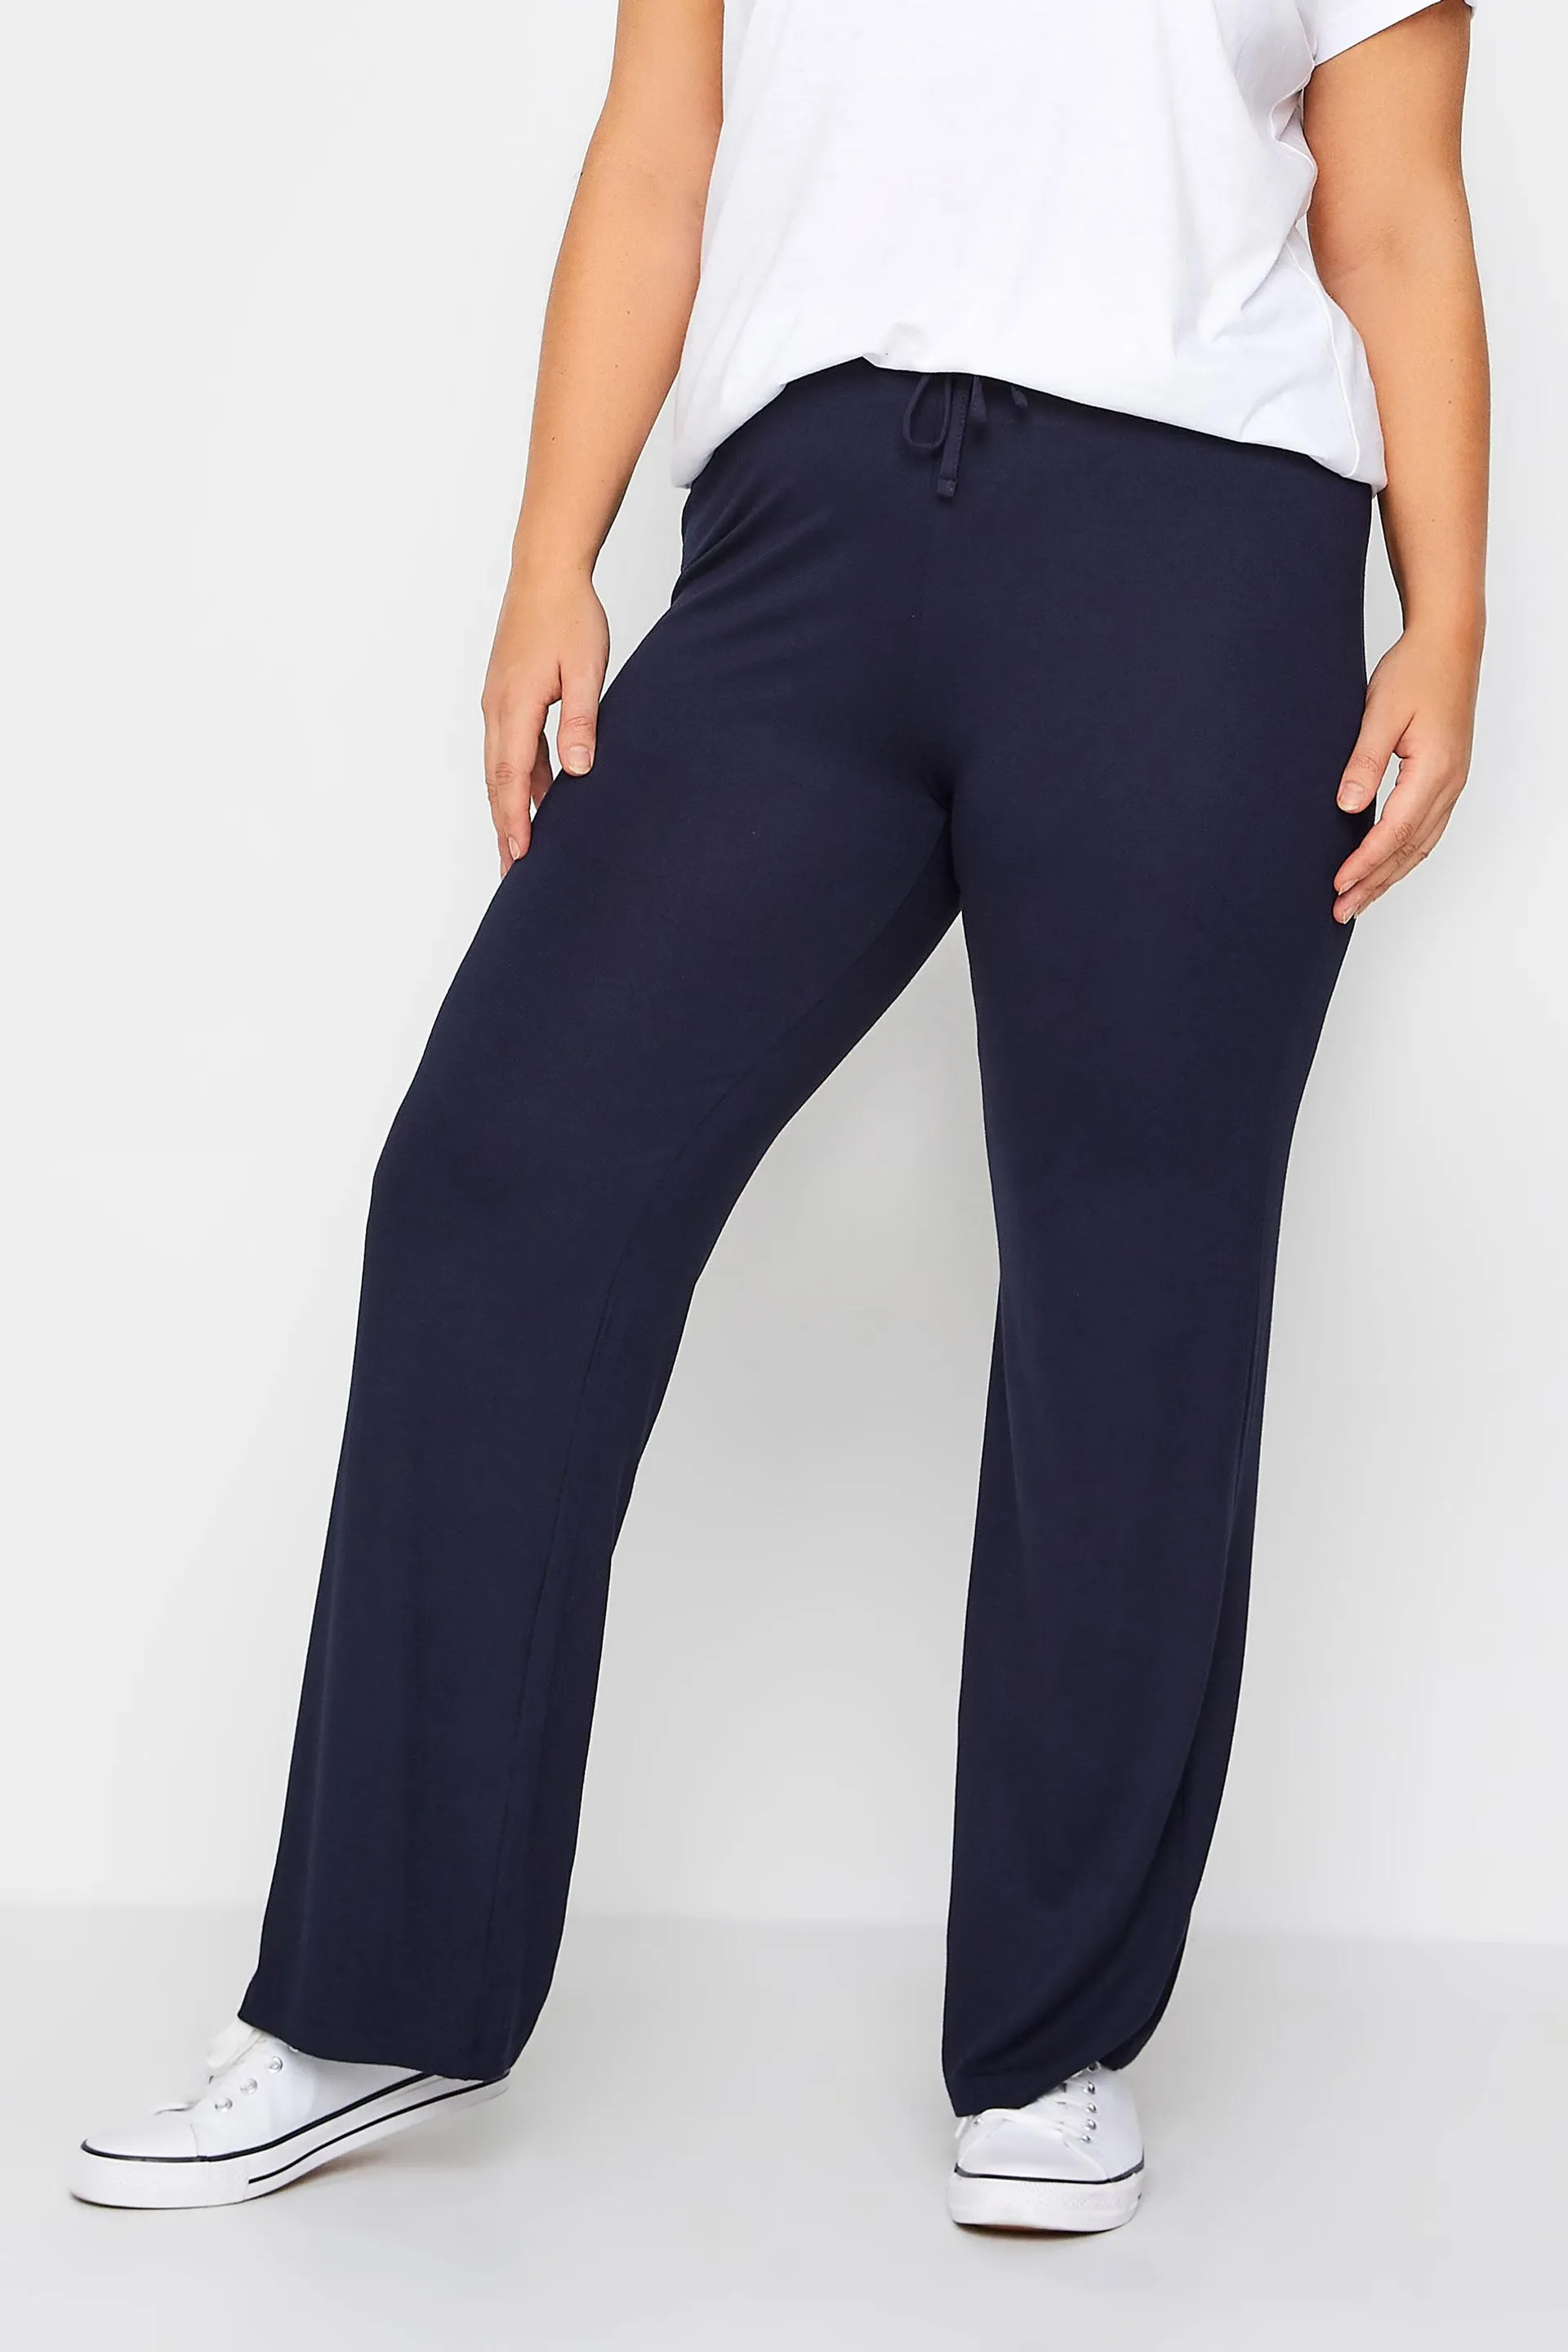 YOURS BESTSELLER Curve Navy Blue Wide Leg Pull On Stretch Jersey Yoga Pants